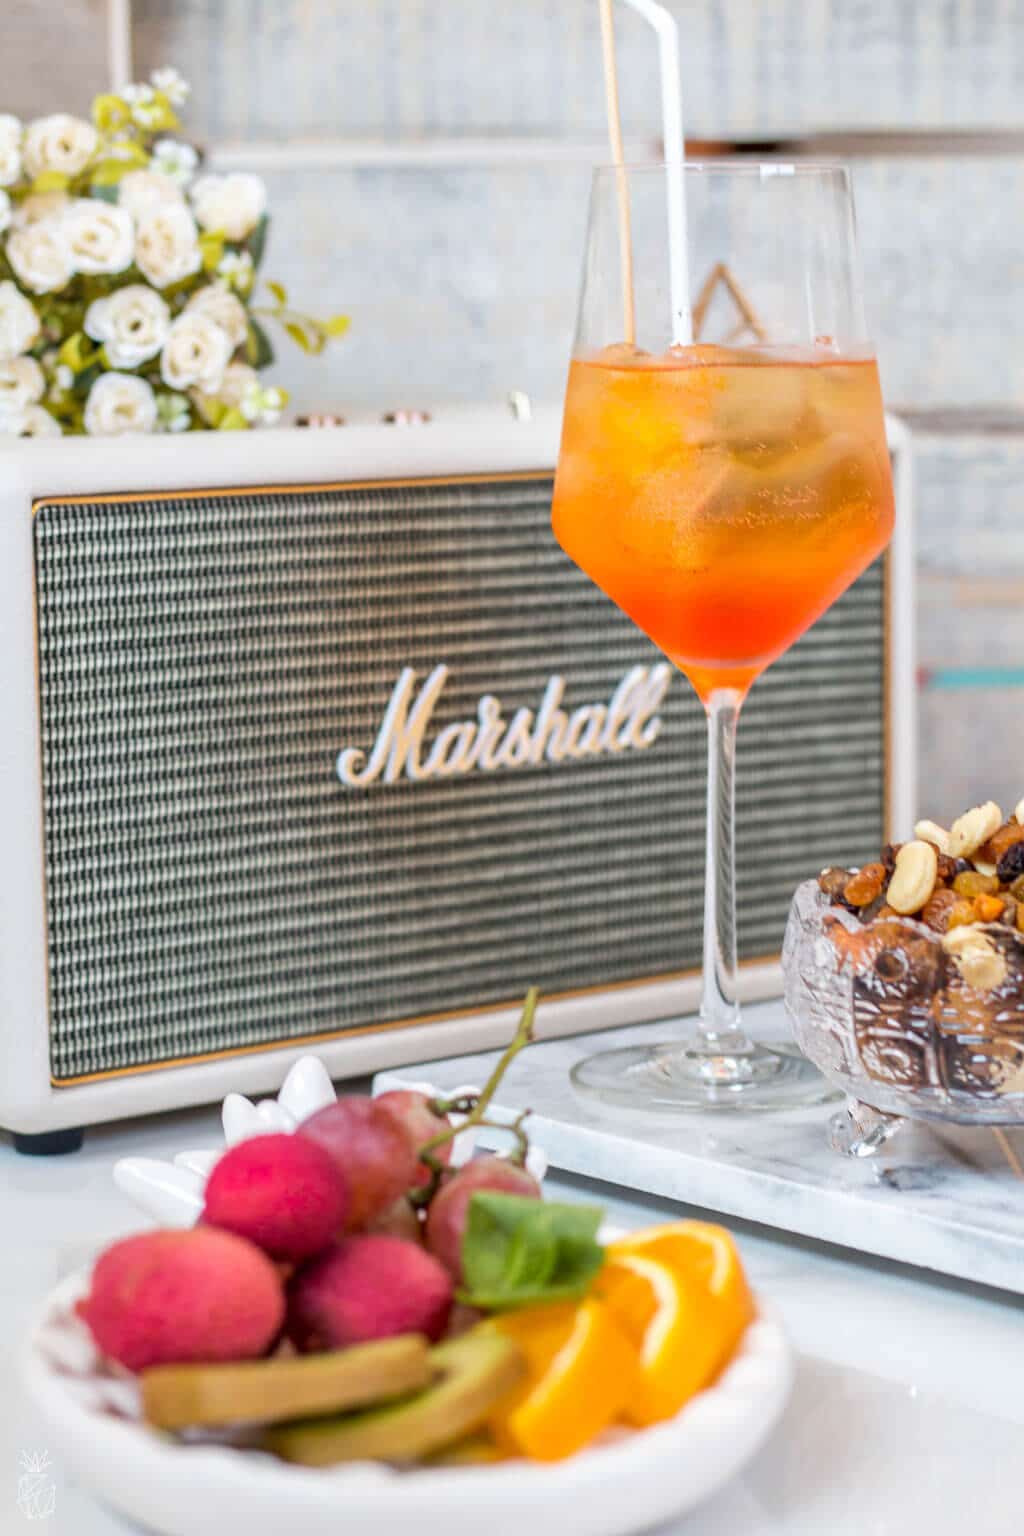 Aperol Spritz recipe - how to make the Italian refreshing & easy summer cocktail at home - Click on the photo for the full recipe @ hedonistit.com